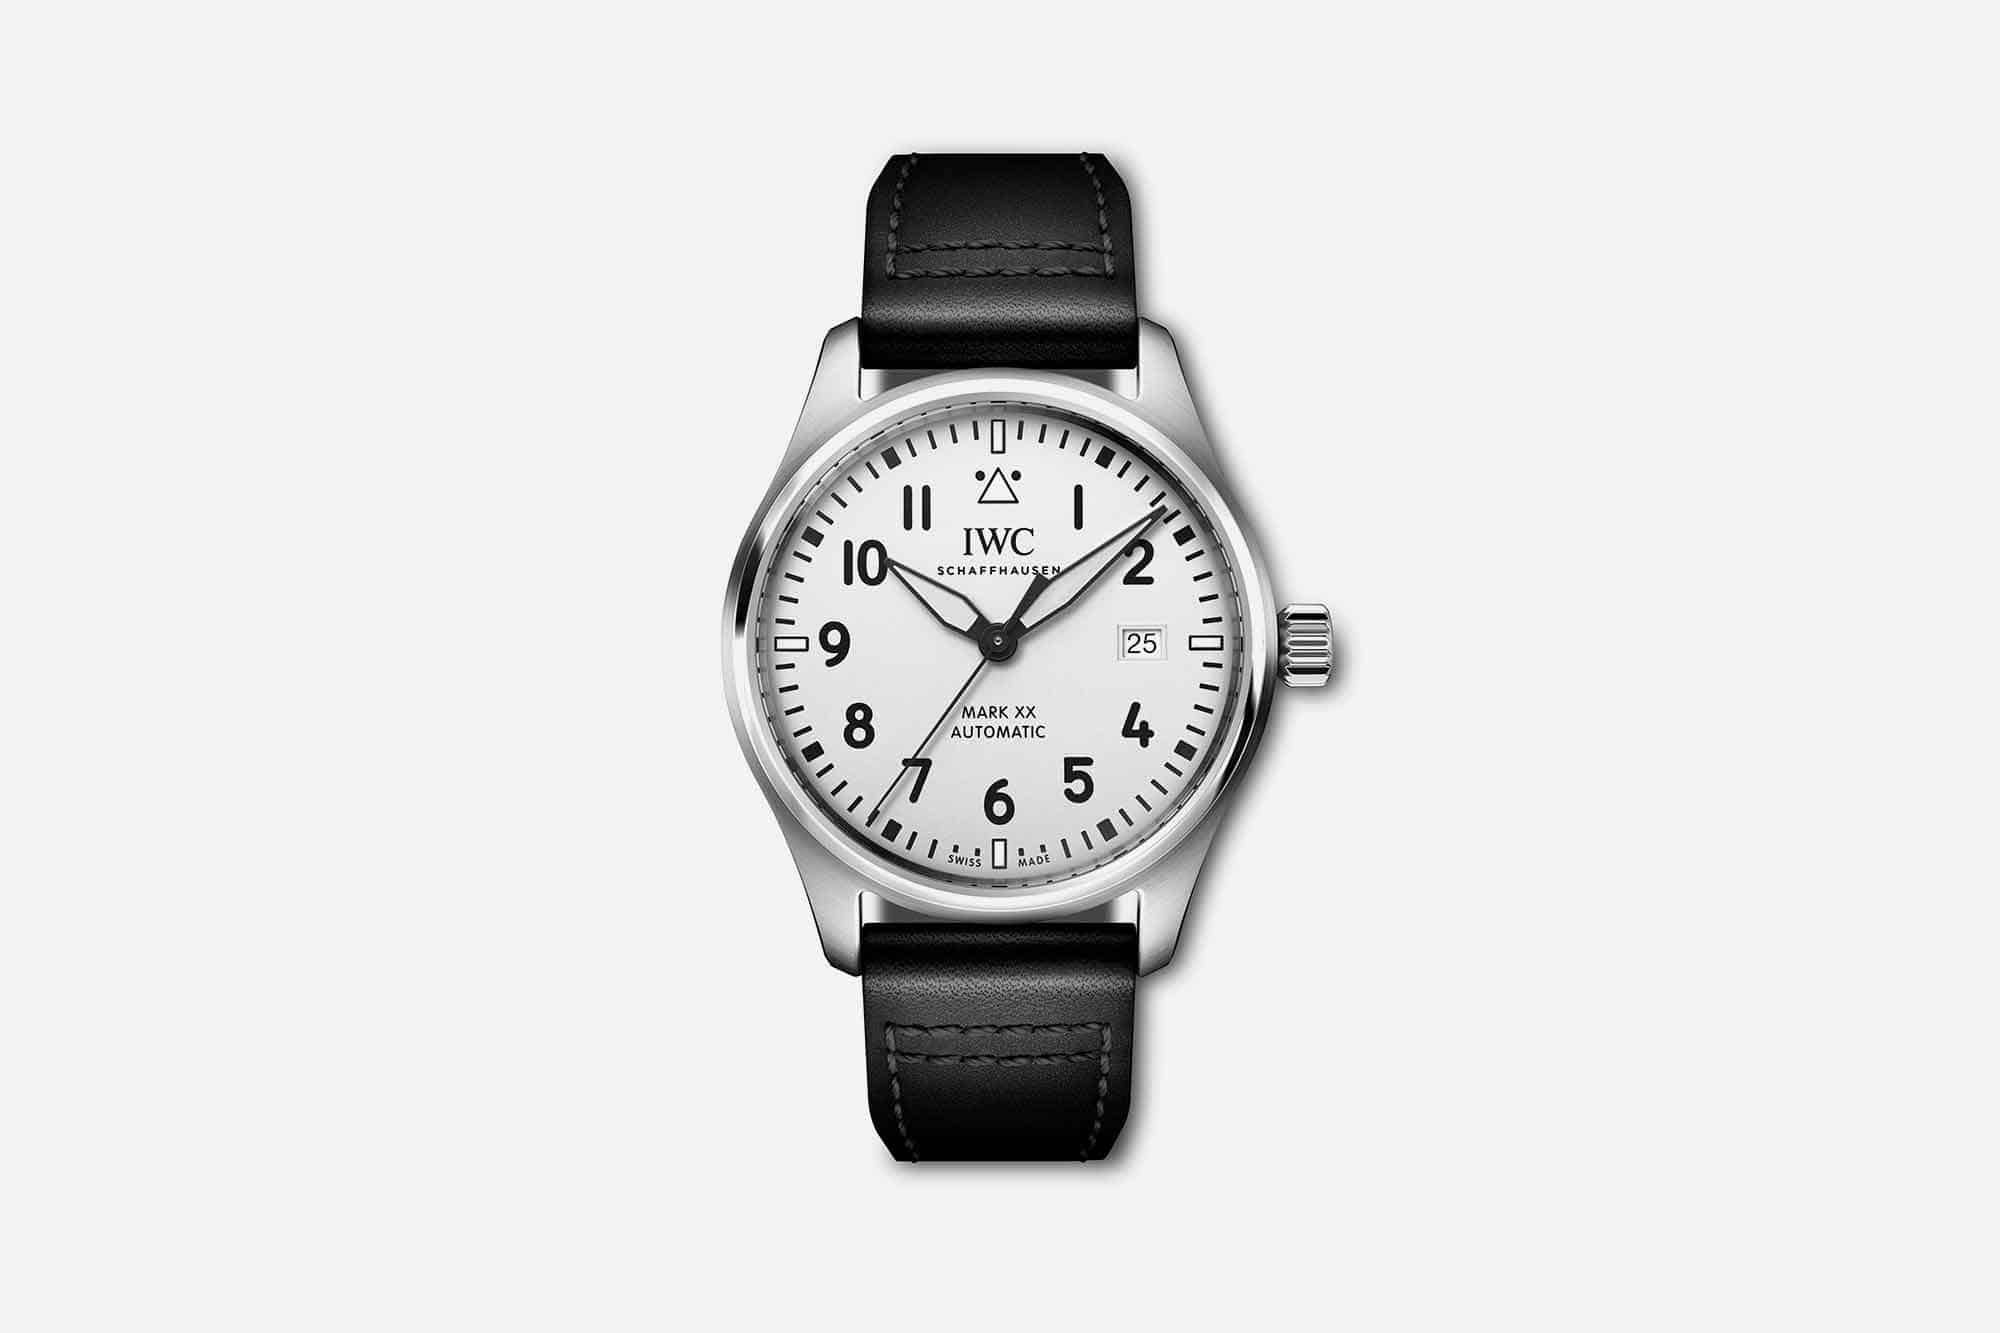 IWC’s Mark Series Turns 75, and the Brand Celebrates with a New Silver Dialed Variant of the Popular Pilot’s Watch